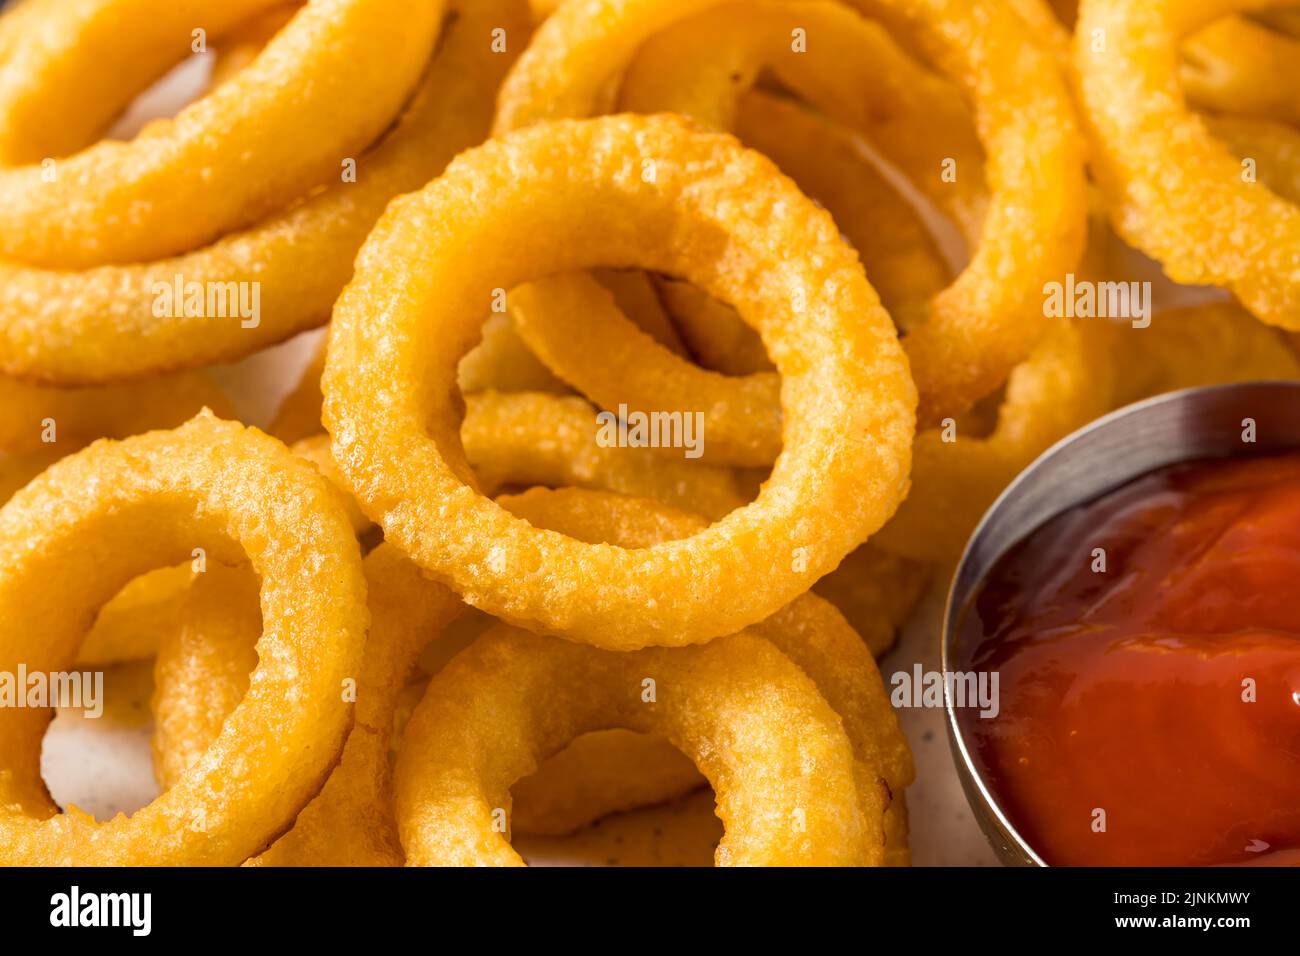 Homemade Battered Onion Rings with Ketchup Sauce Stock Photo